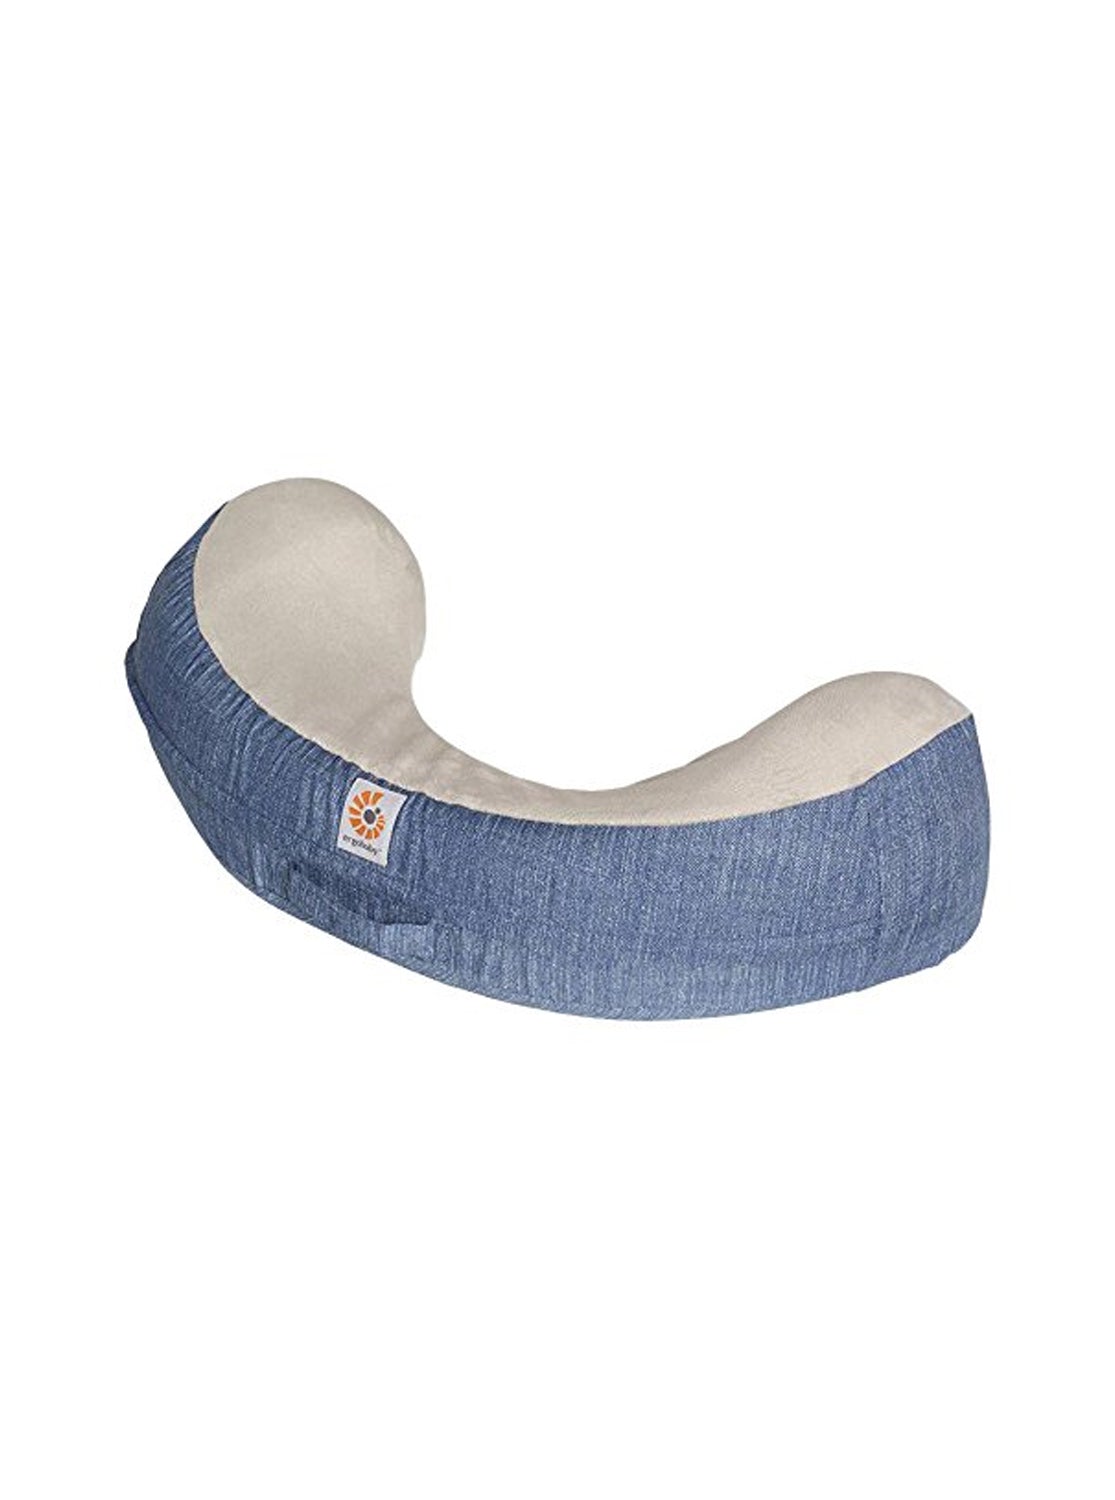 ERGOBABY Natural Curve Nursing Pillow Cover, -- ANB Baby